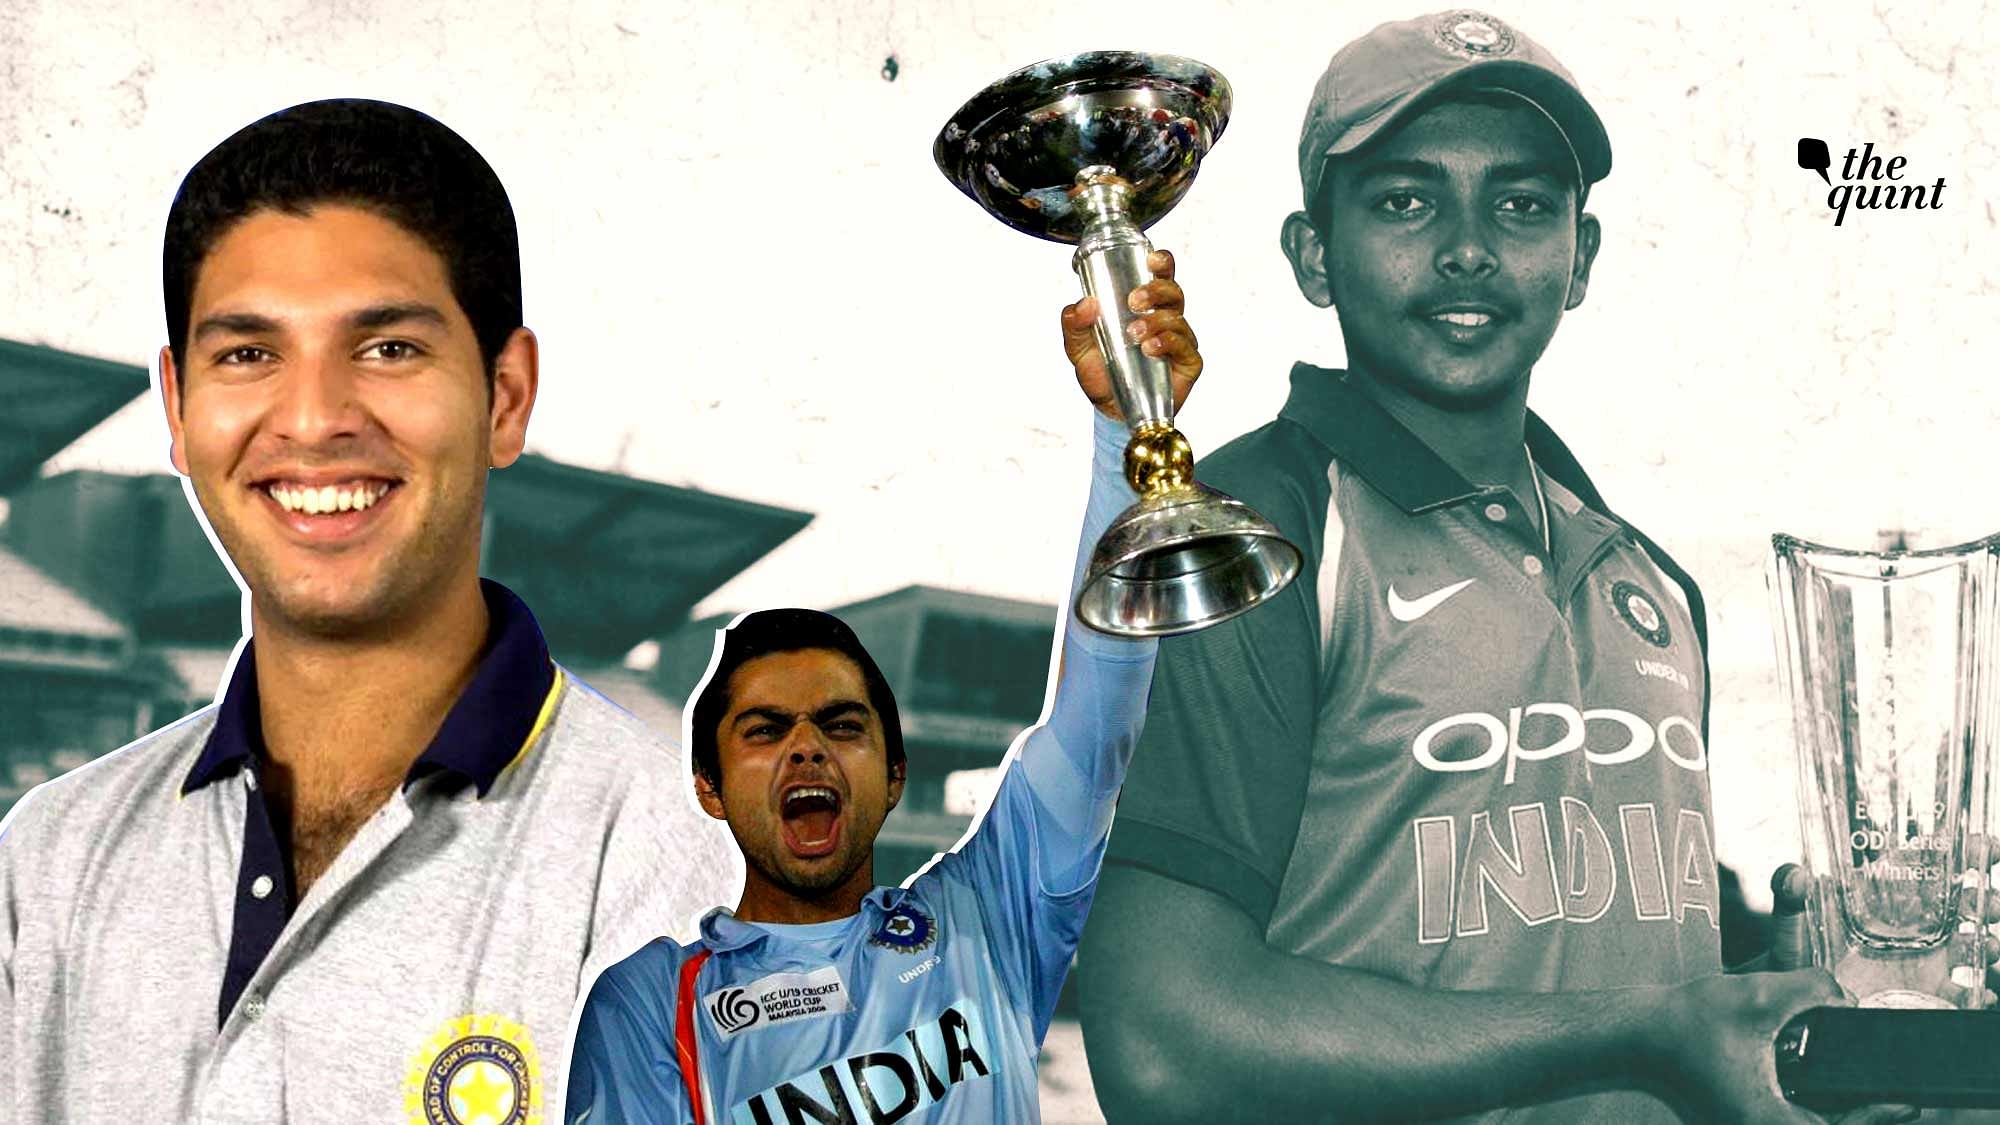 Several Indian stars have emerged from the Under-19 World Cup over the years, including legends of the game like Yuvraj Singh and Virat Kohli.